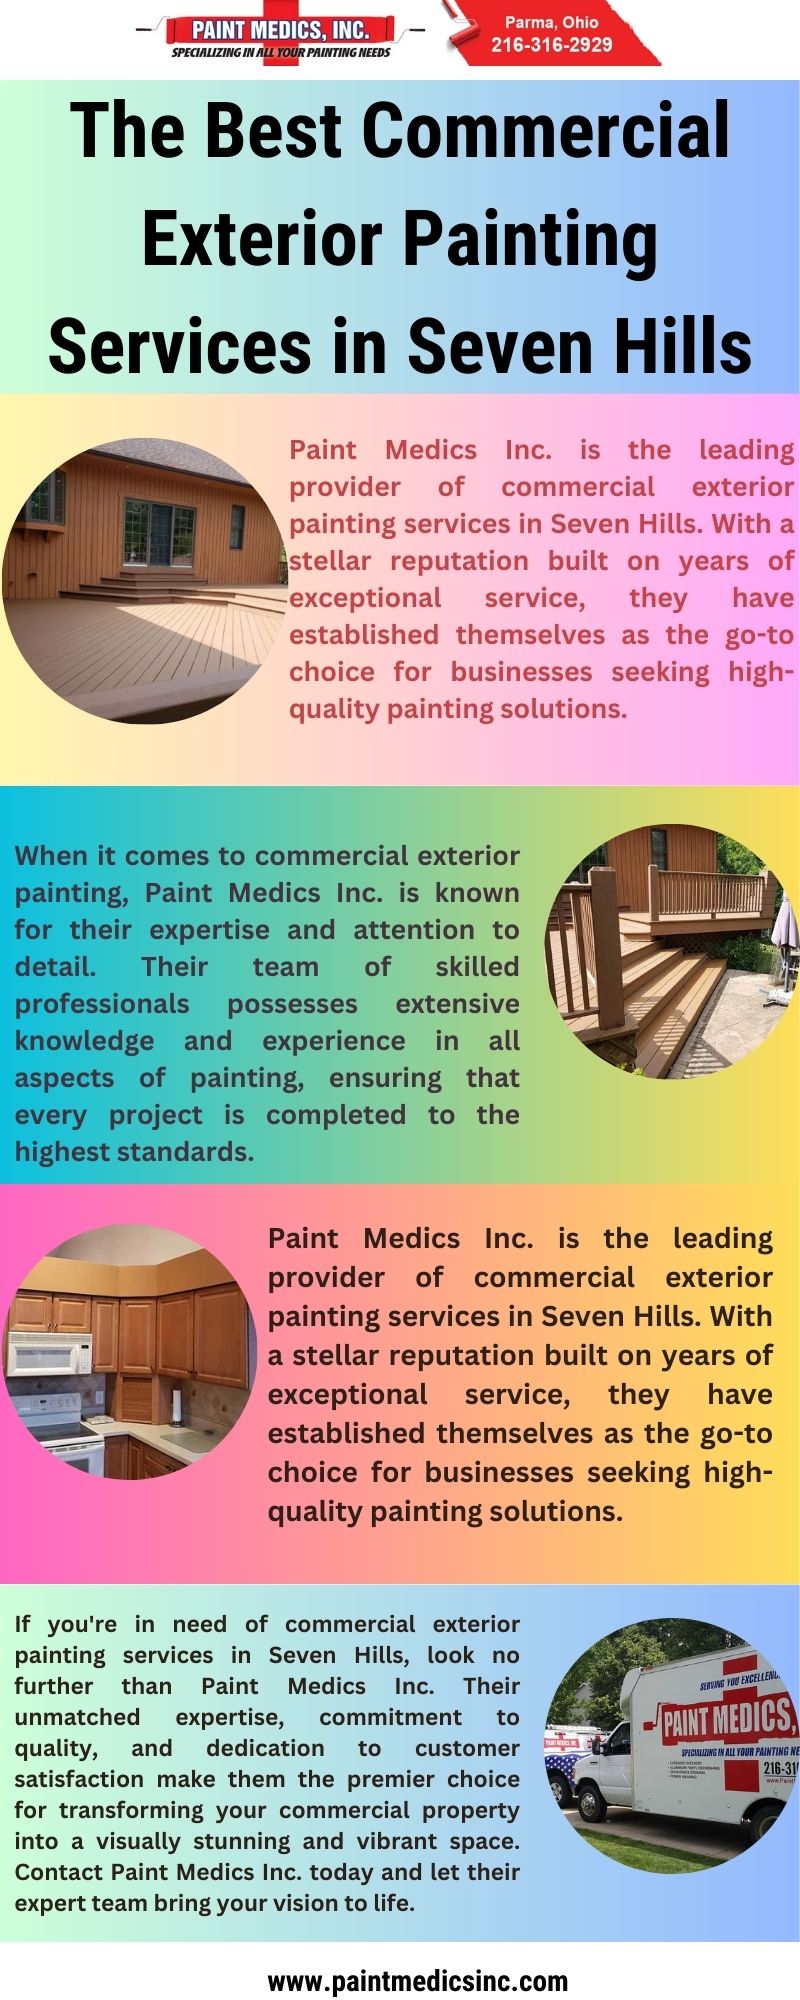 Professional Commercial Exterior Painting Services in Seven Hills